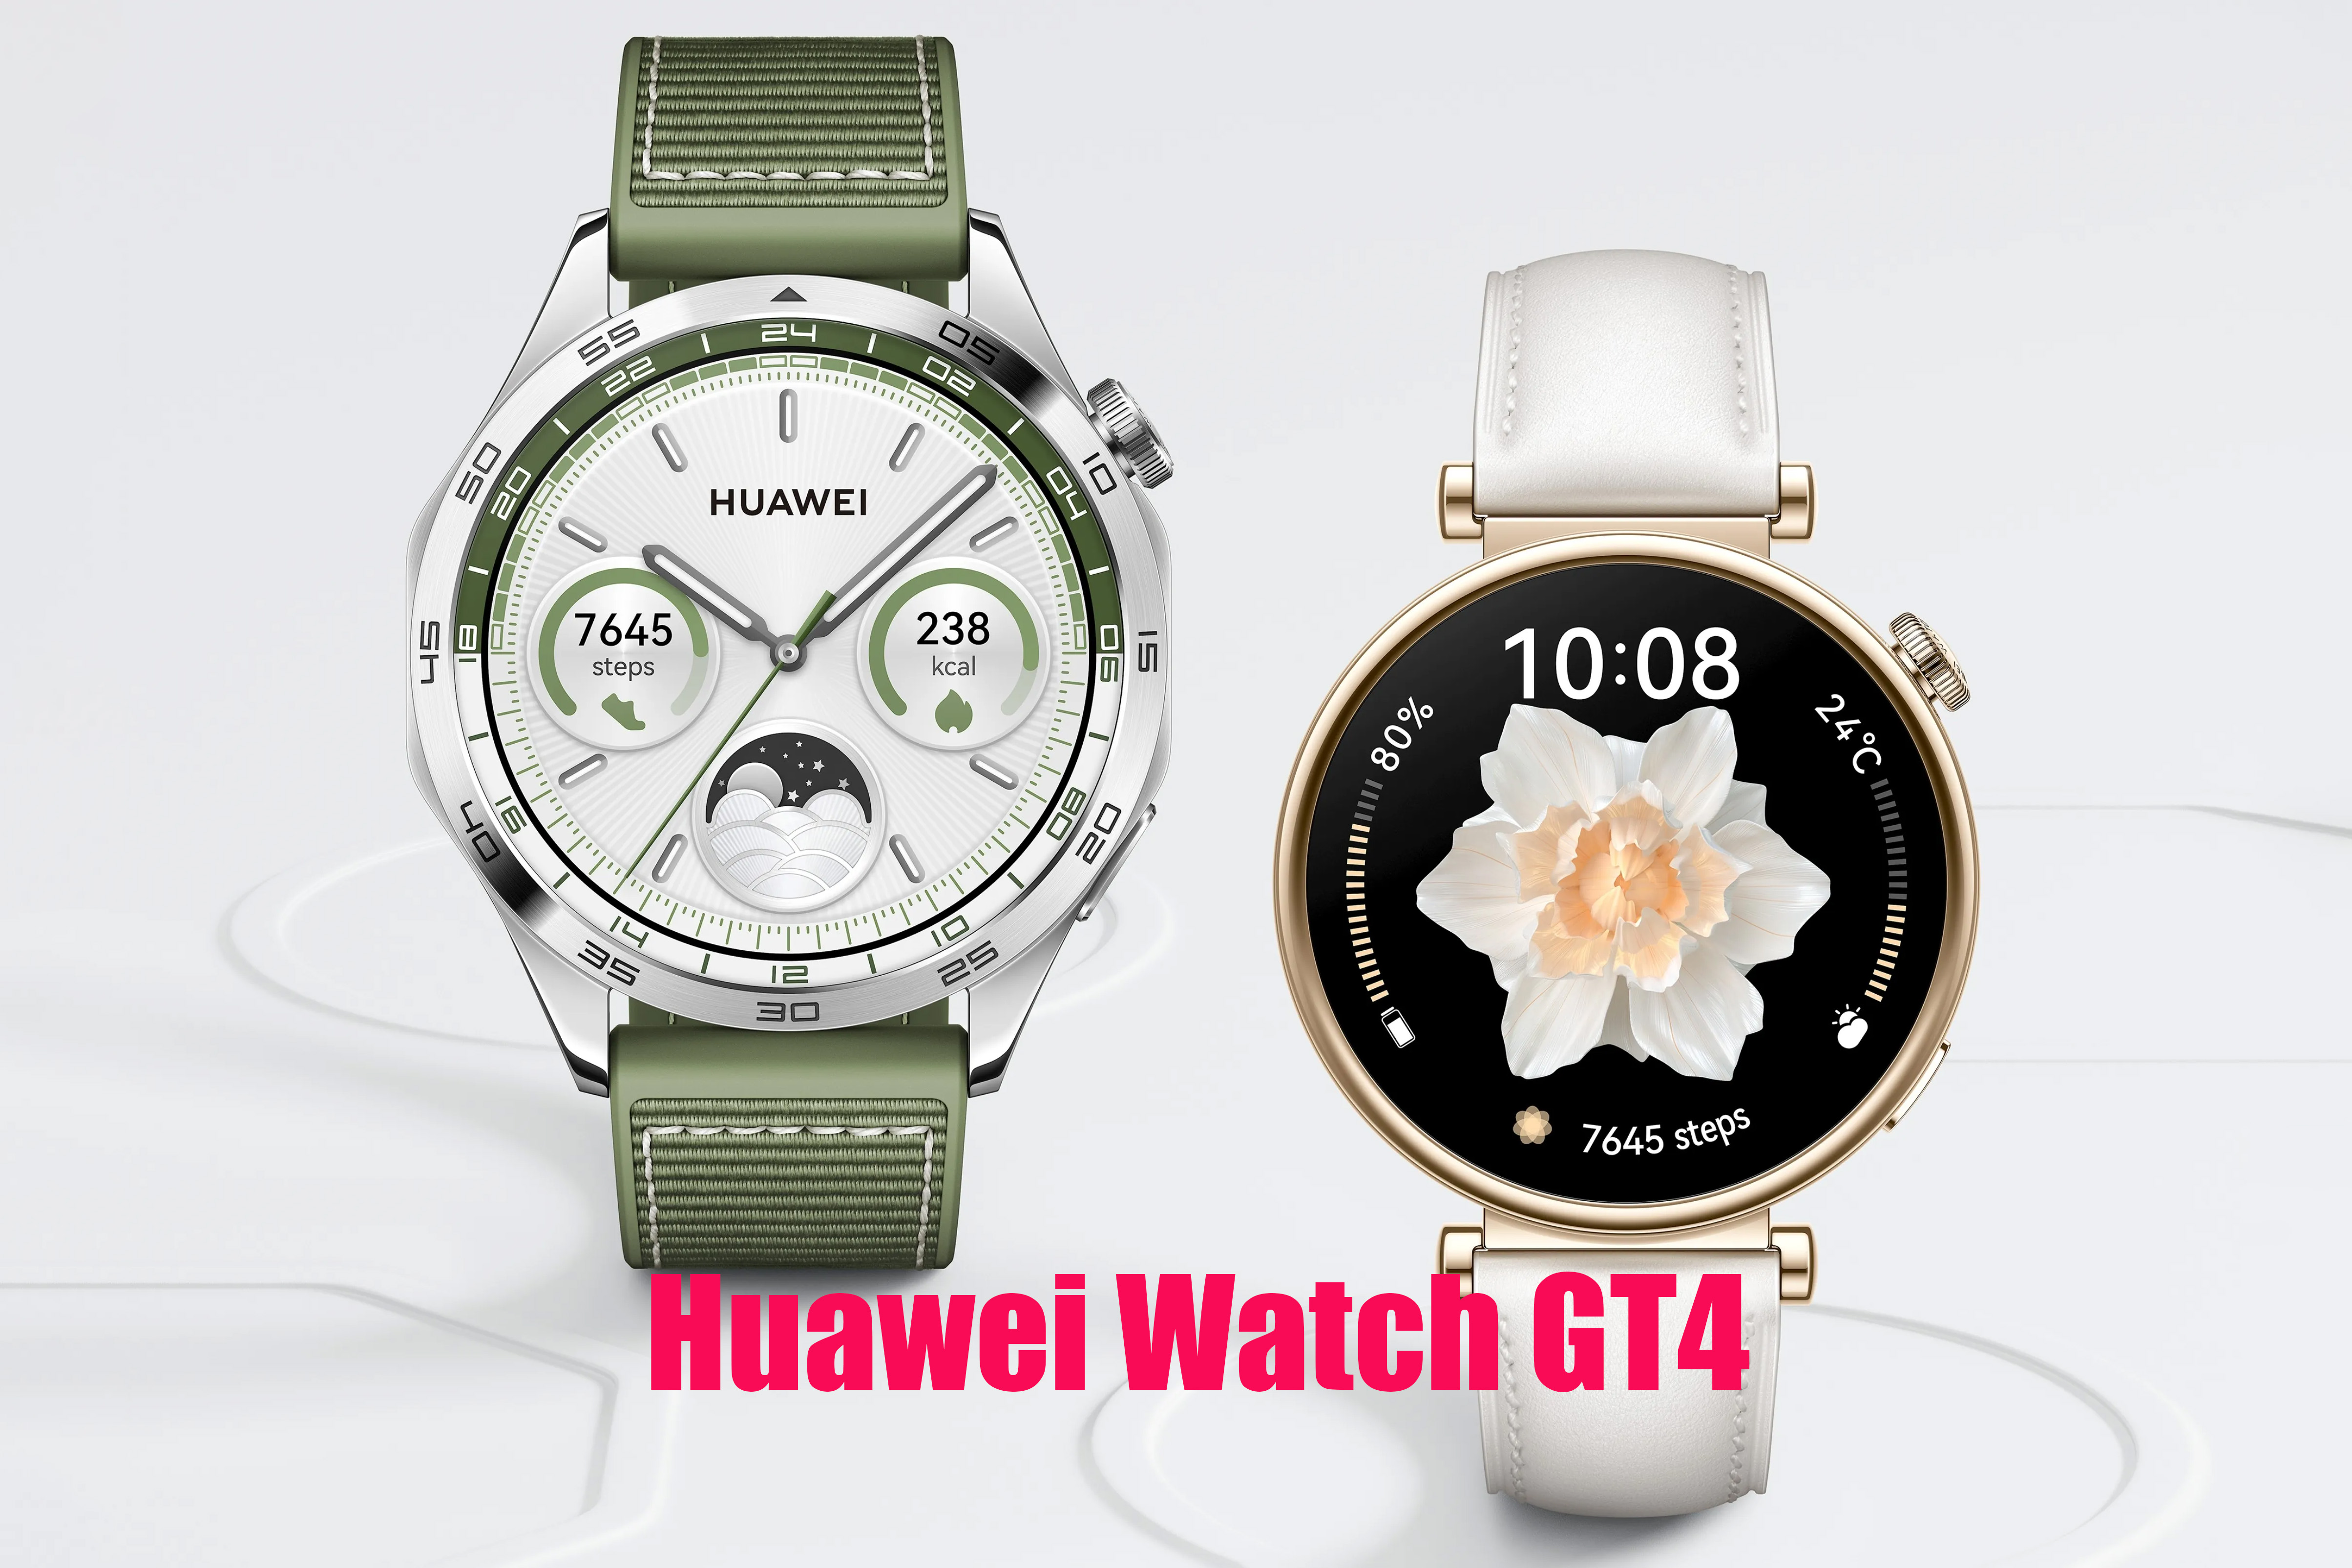 Huawei Watch GT4 available in 41mm and 46mm sizes, with improved health tracking